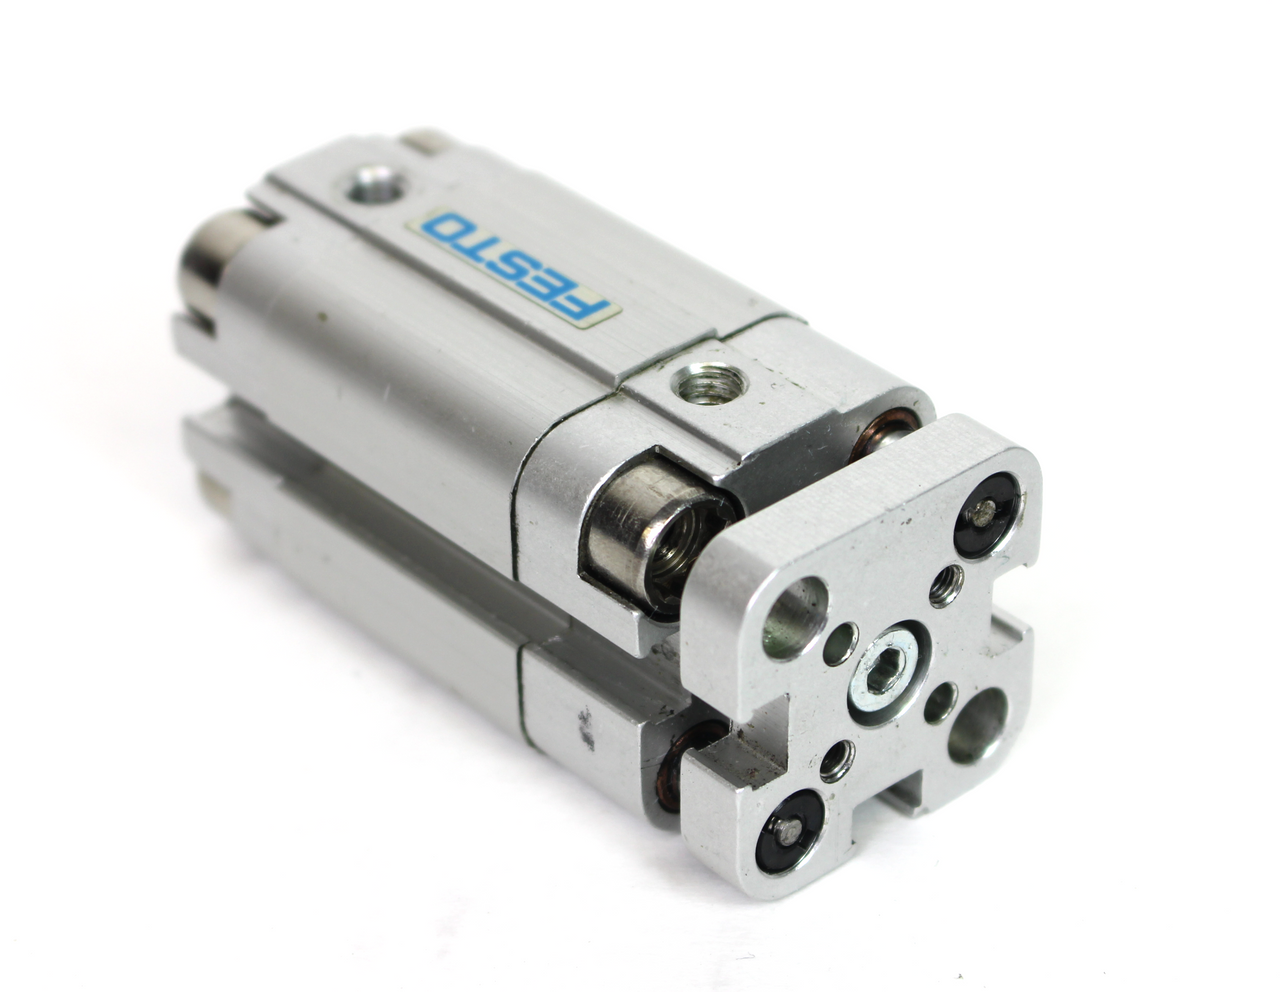 Festo ADVUL-16-15-P-A Pneumatic Compact Air Cylinder, 16mm Bore, 15mm Stroke